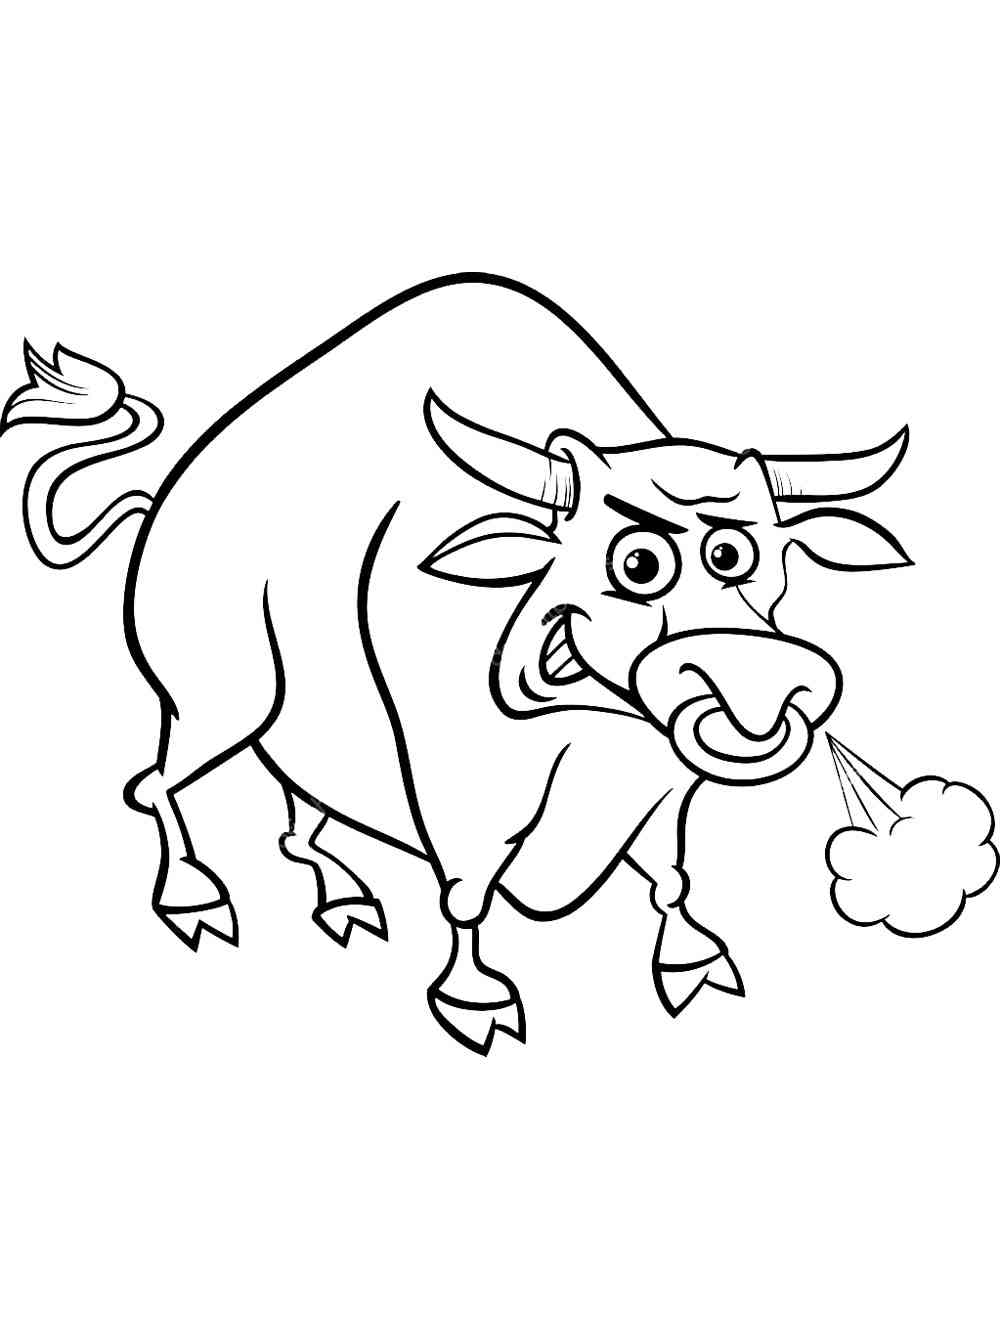 Angry Cartoon Ox coloring page